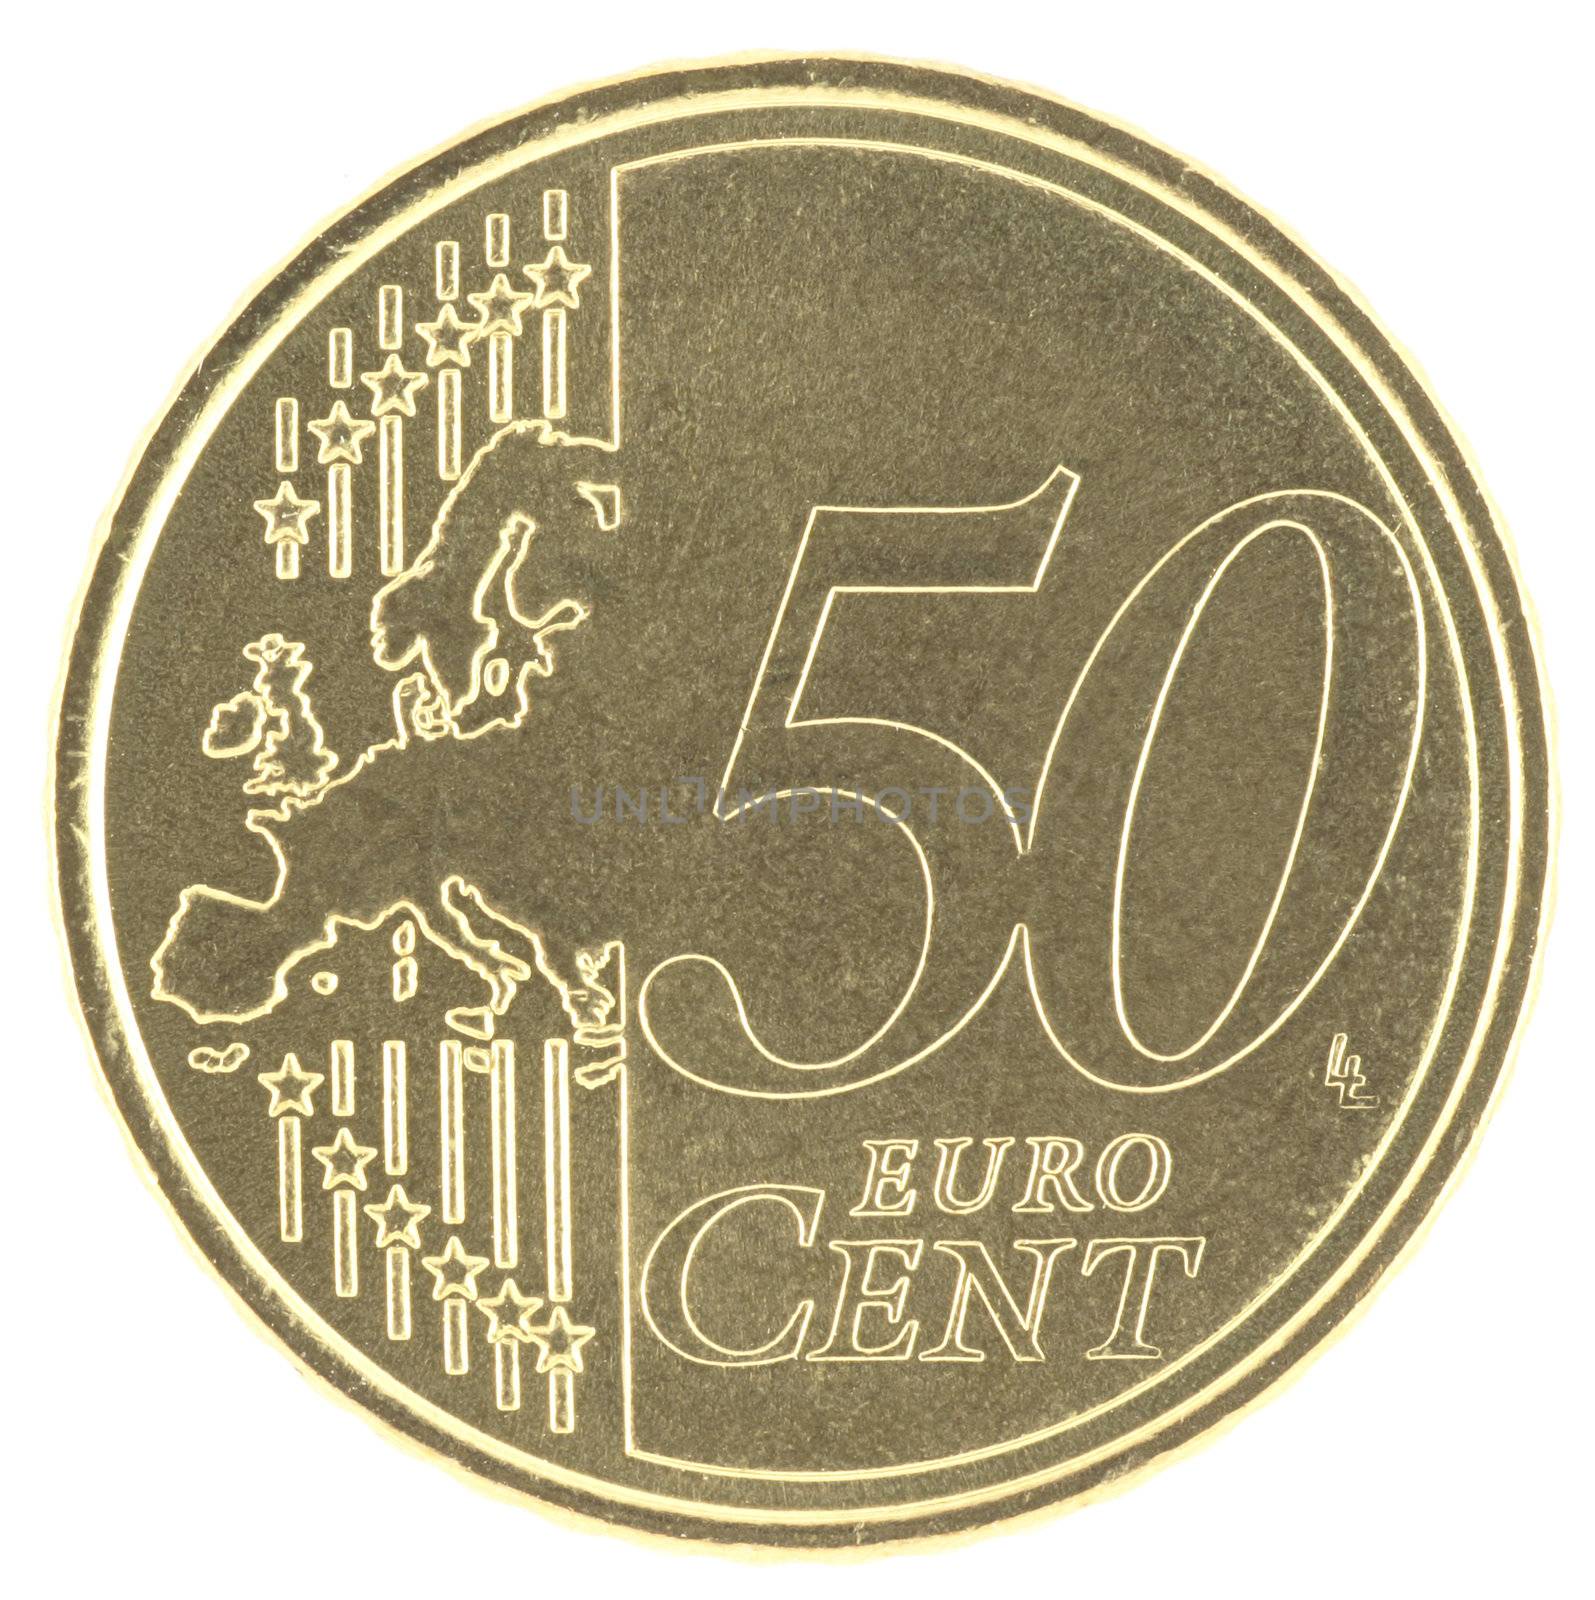 Uncirculated 50 Eurocent new map by Georgios